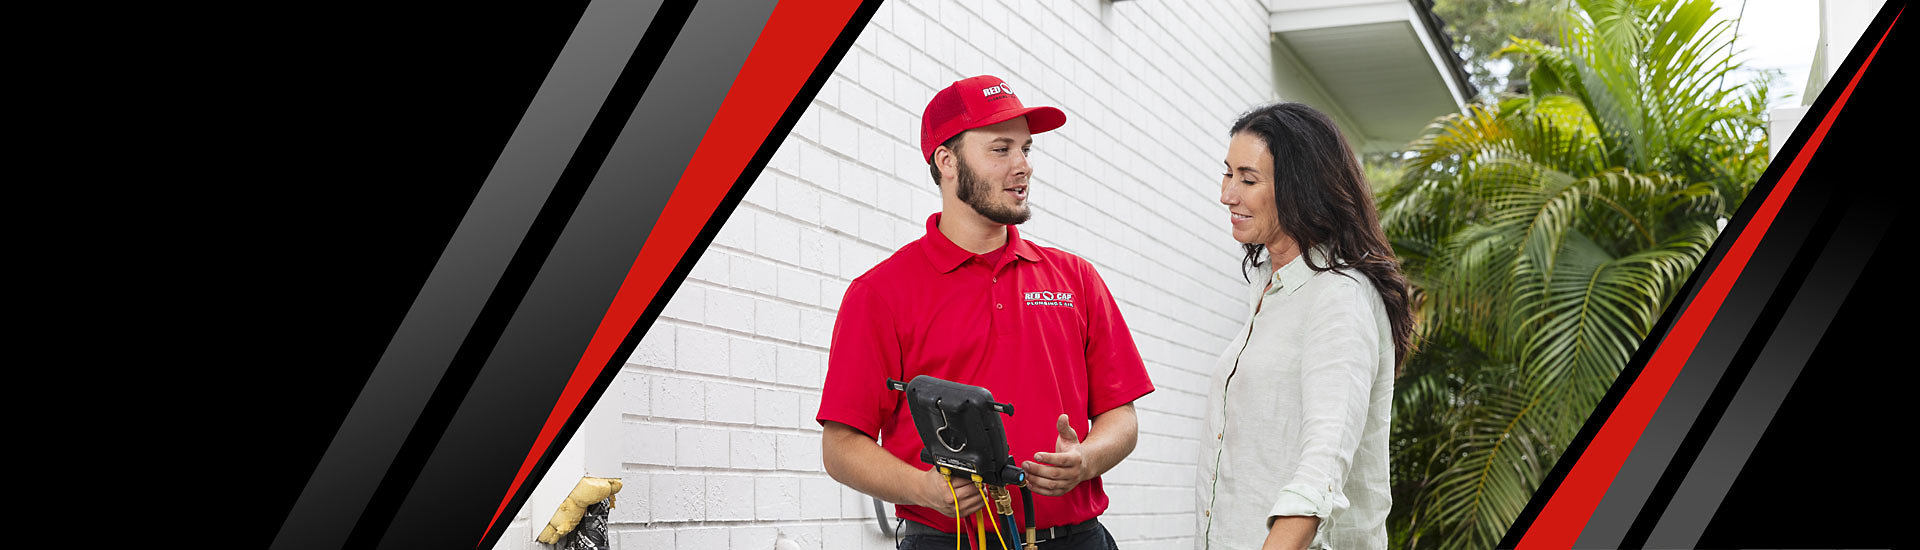 A Red Cap technician and a costumer standing next to an air conditioner